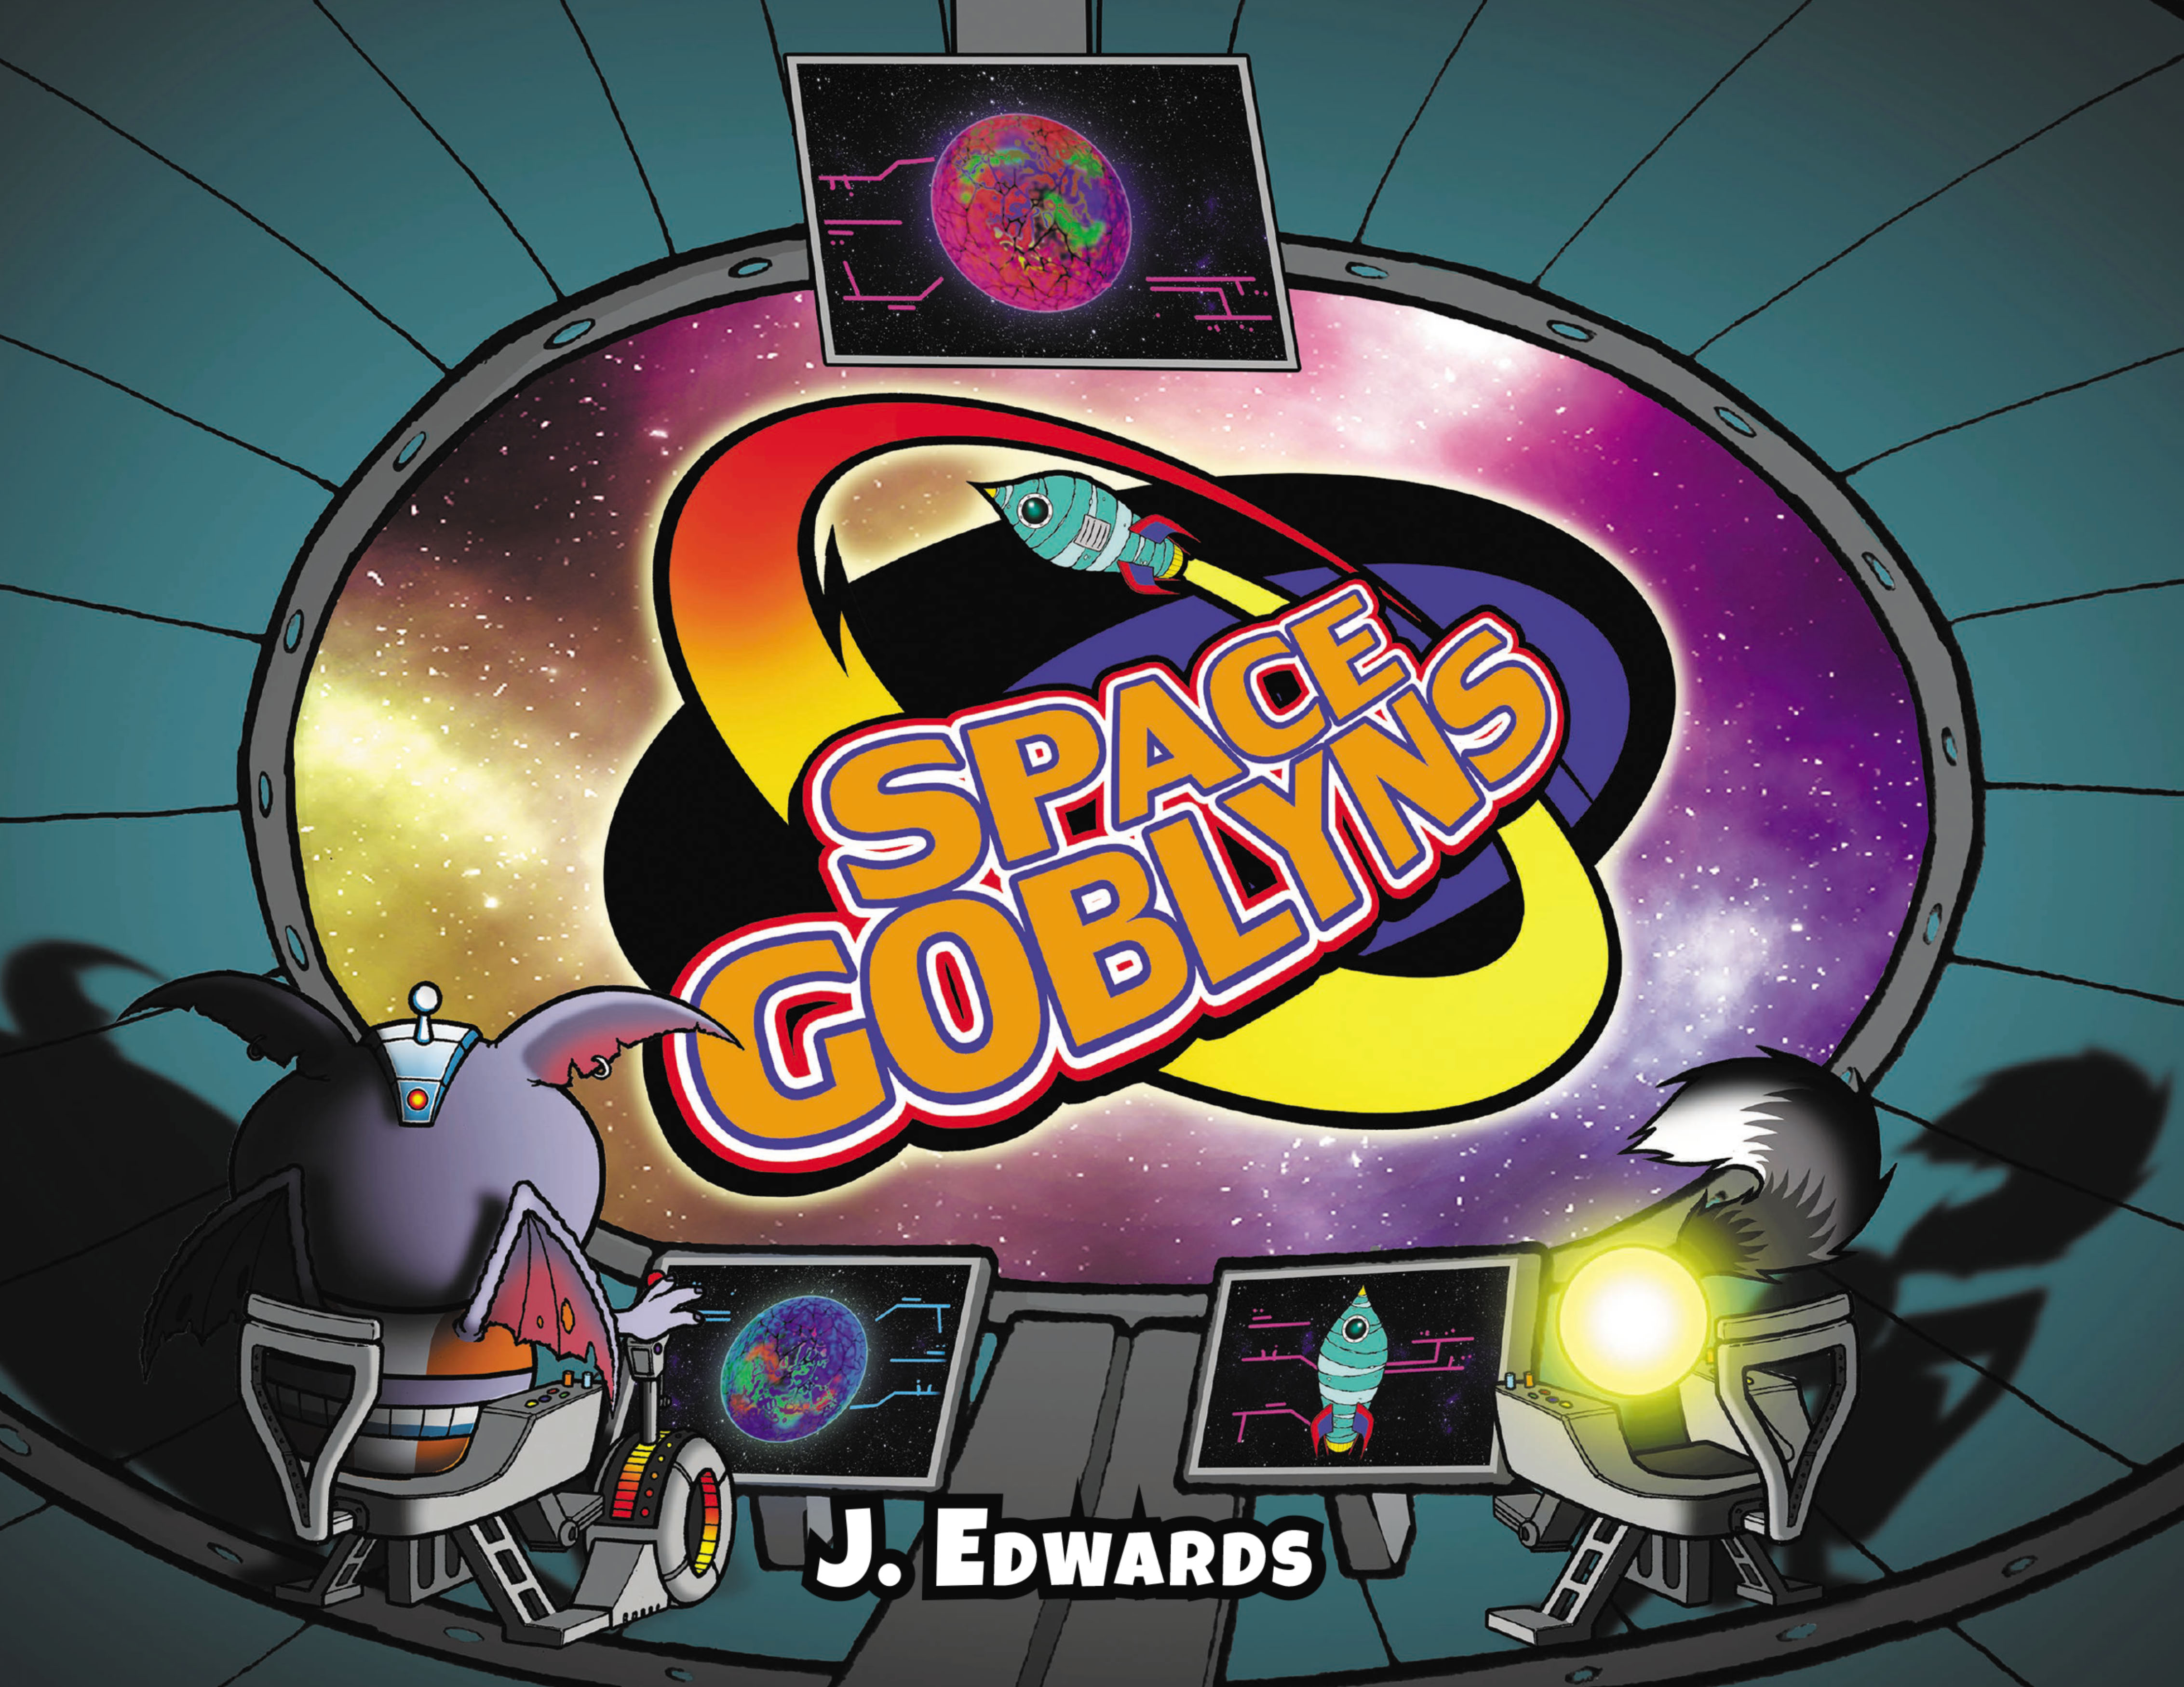 Author J. Edwards’s New Book, "Space Goblyns," Follows Lilyoblyn and Her Pet Squito on an Epic Journey Through Space to Meet New Friends and See Exciting New Worlds